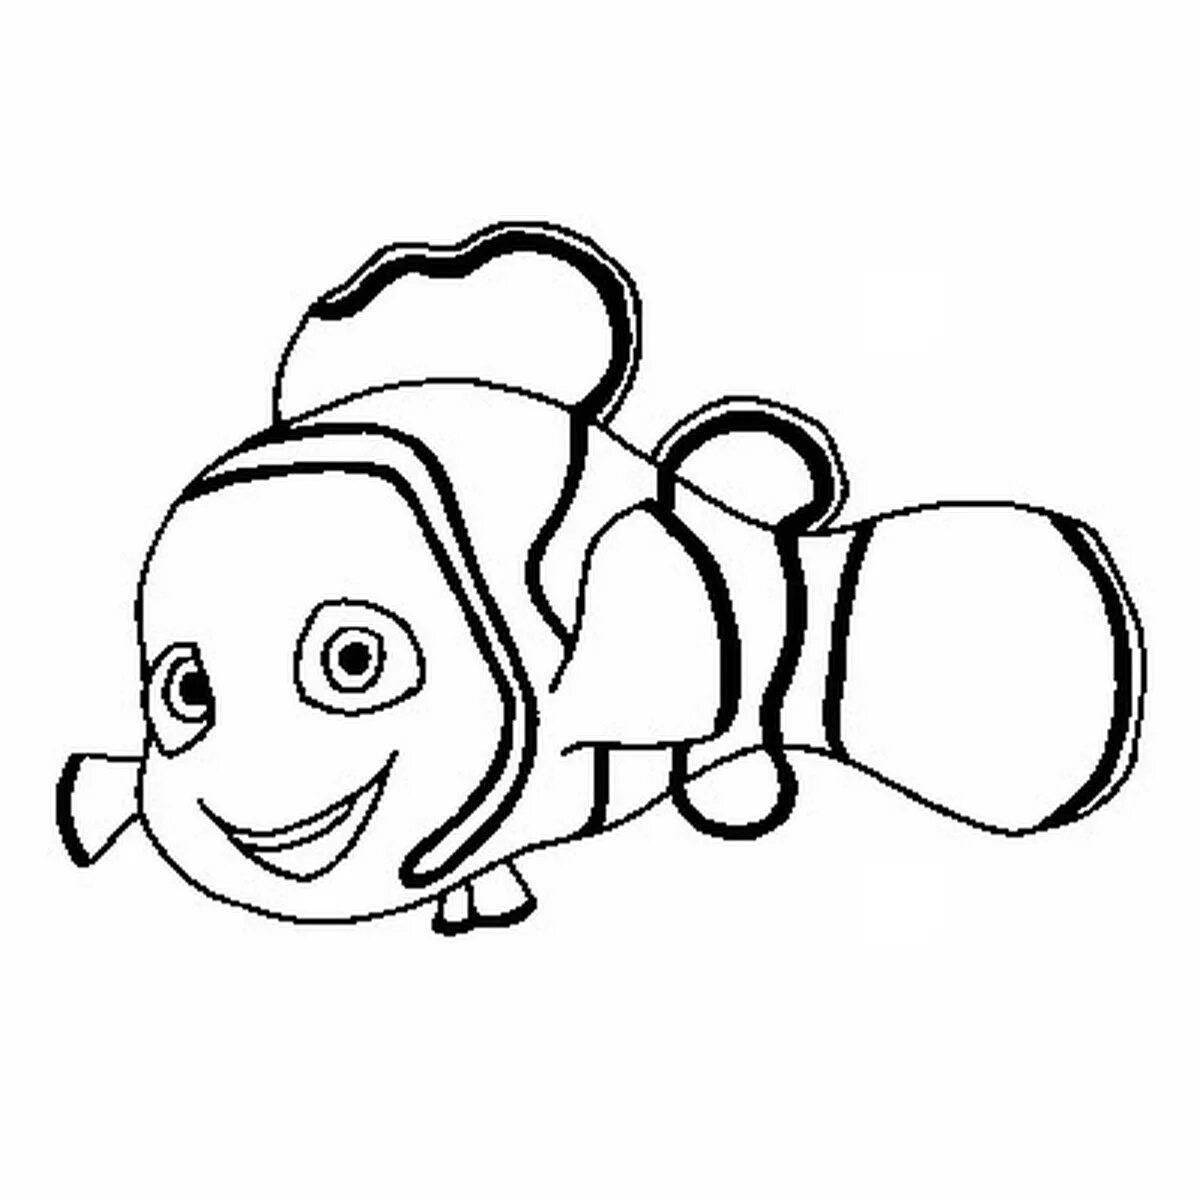 Great drawing of a clownfish